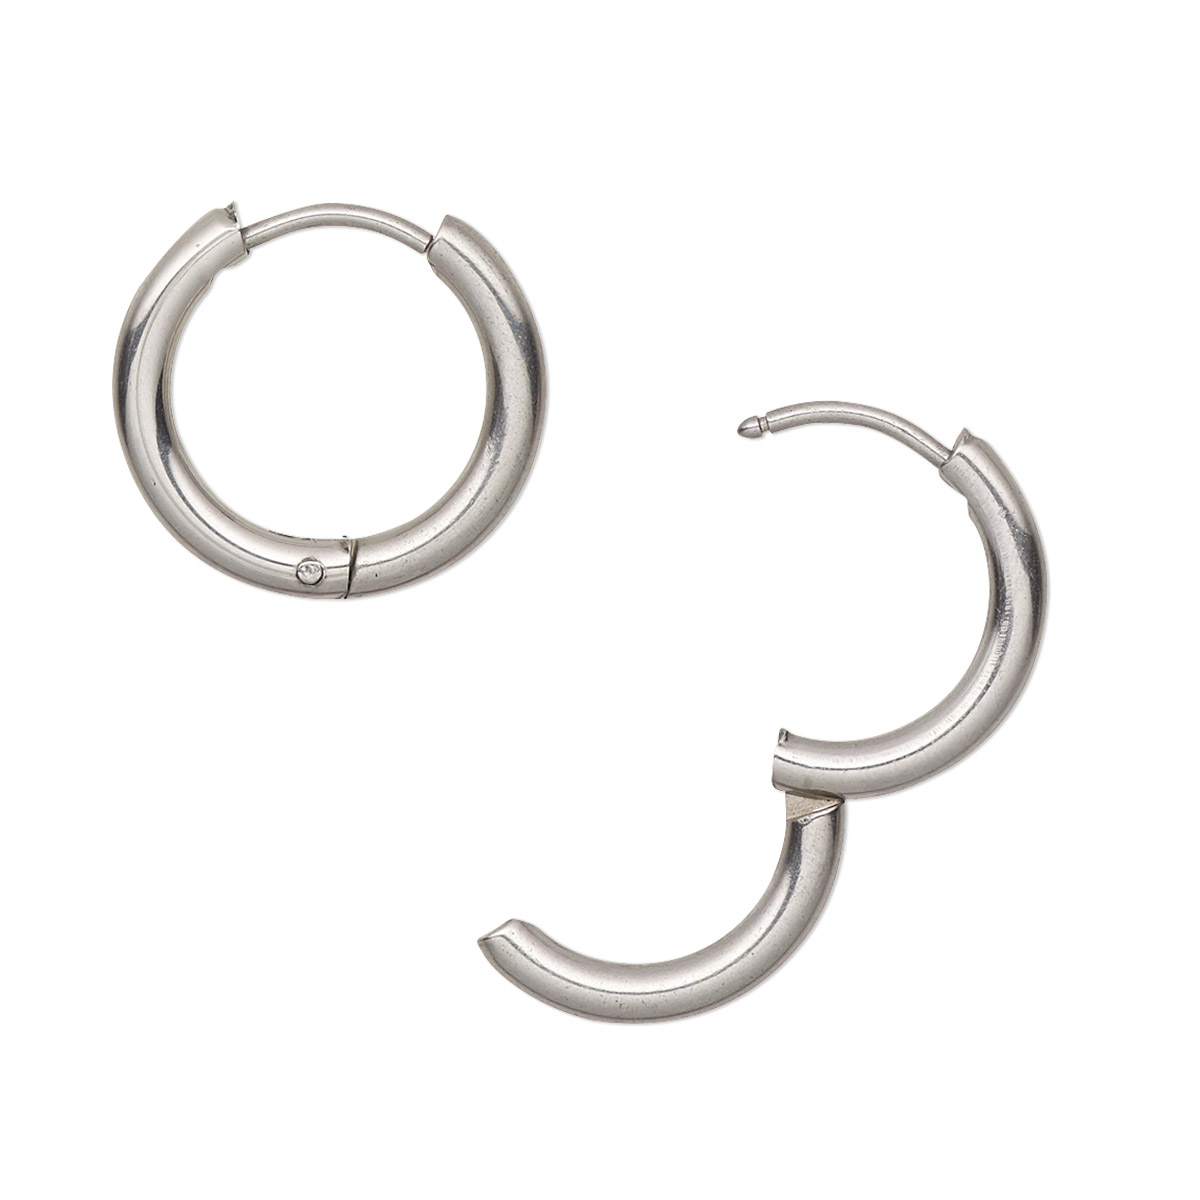 Earring, stainless steel, 16mm endless hoop with hinged closure. Sold ...